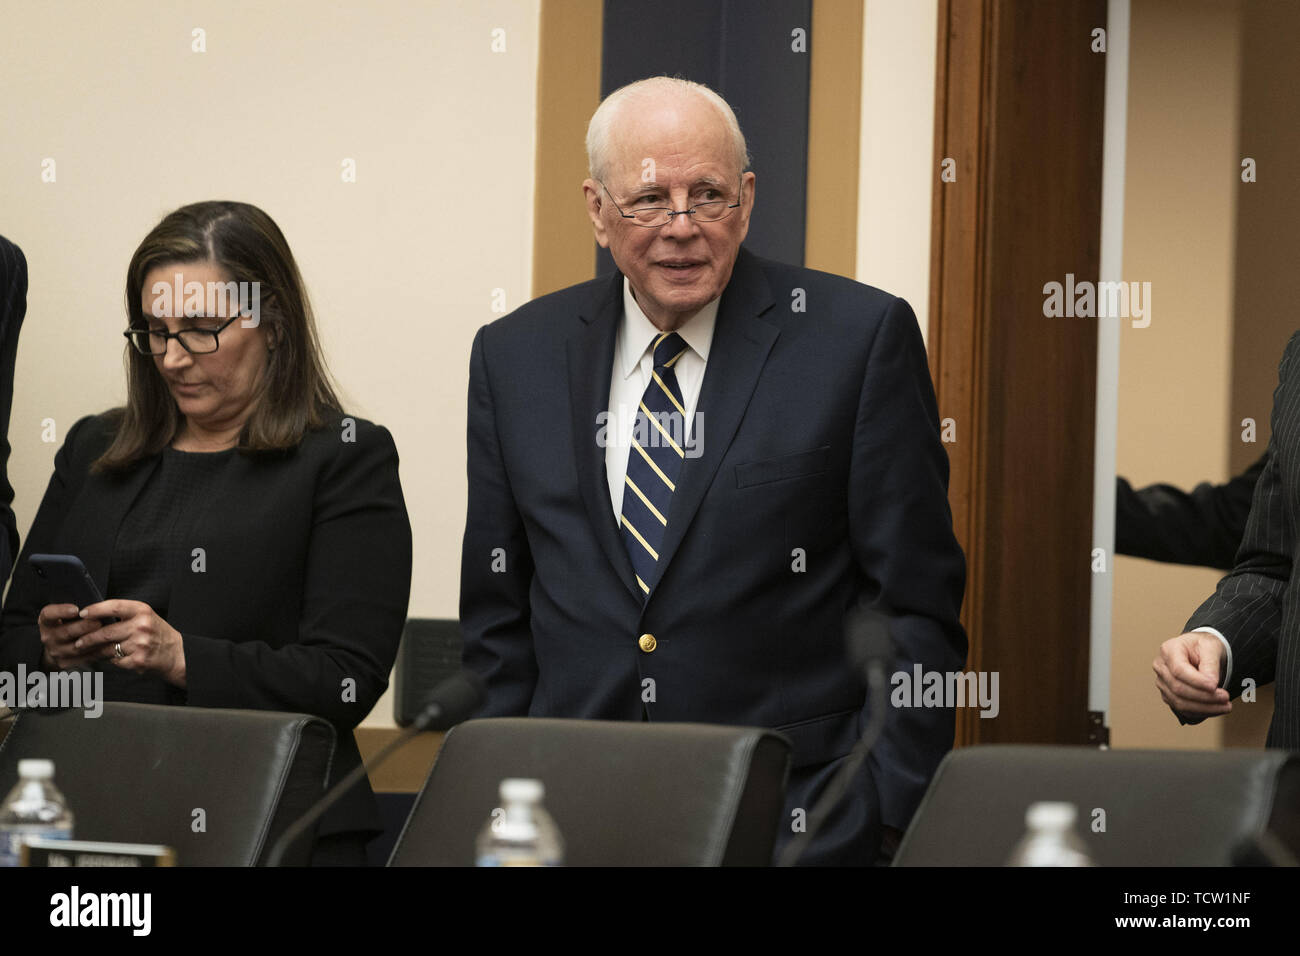 Washington DC, USA. 10th June, 2019. Washington, District of Columbia, USA. 10th June, 2019. JOHN DEAN, BARBARA MCQUADE and JOYCE WHITE VANCE mingle before the House Judiciary Committee in a hearing: Lessons from the Mueller Report: Presidential Obstruction and Other Crimes, June 10, 2019 Credit: Douglas Christian/ZUMA Wire/Alamy Live News Stock Photo